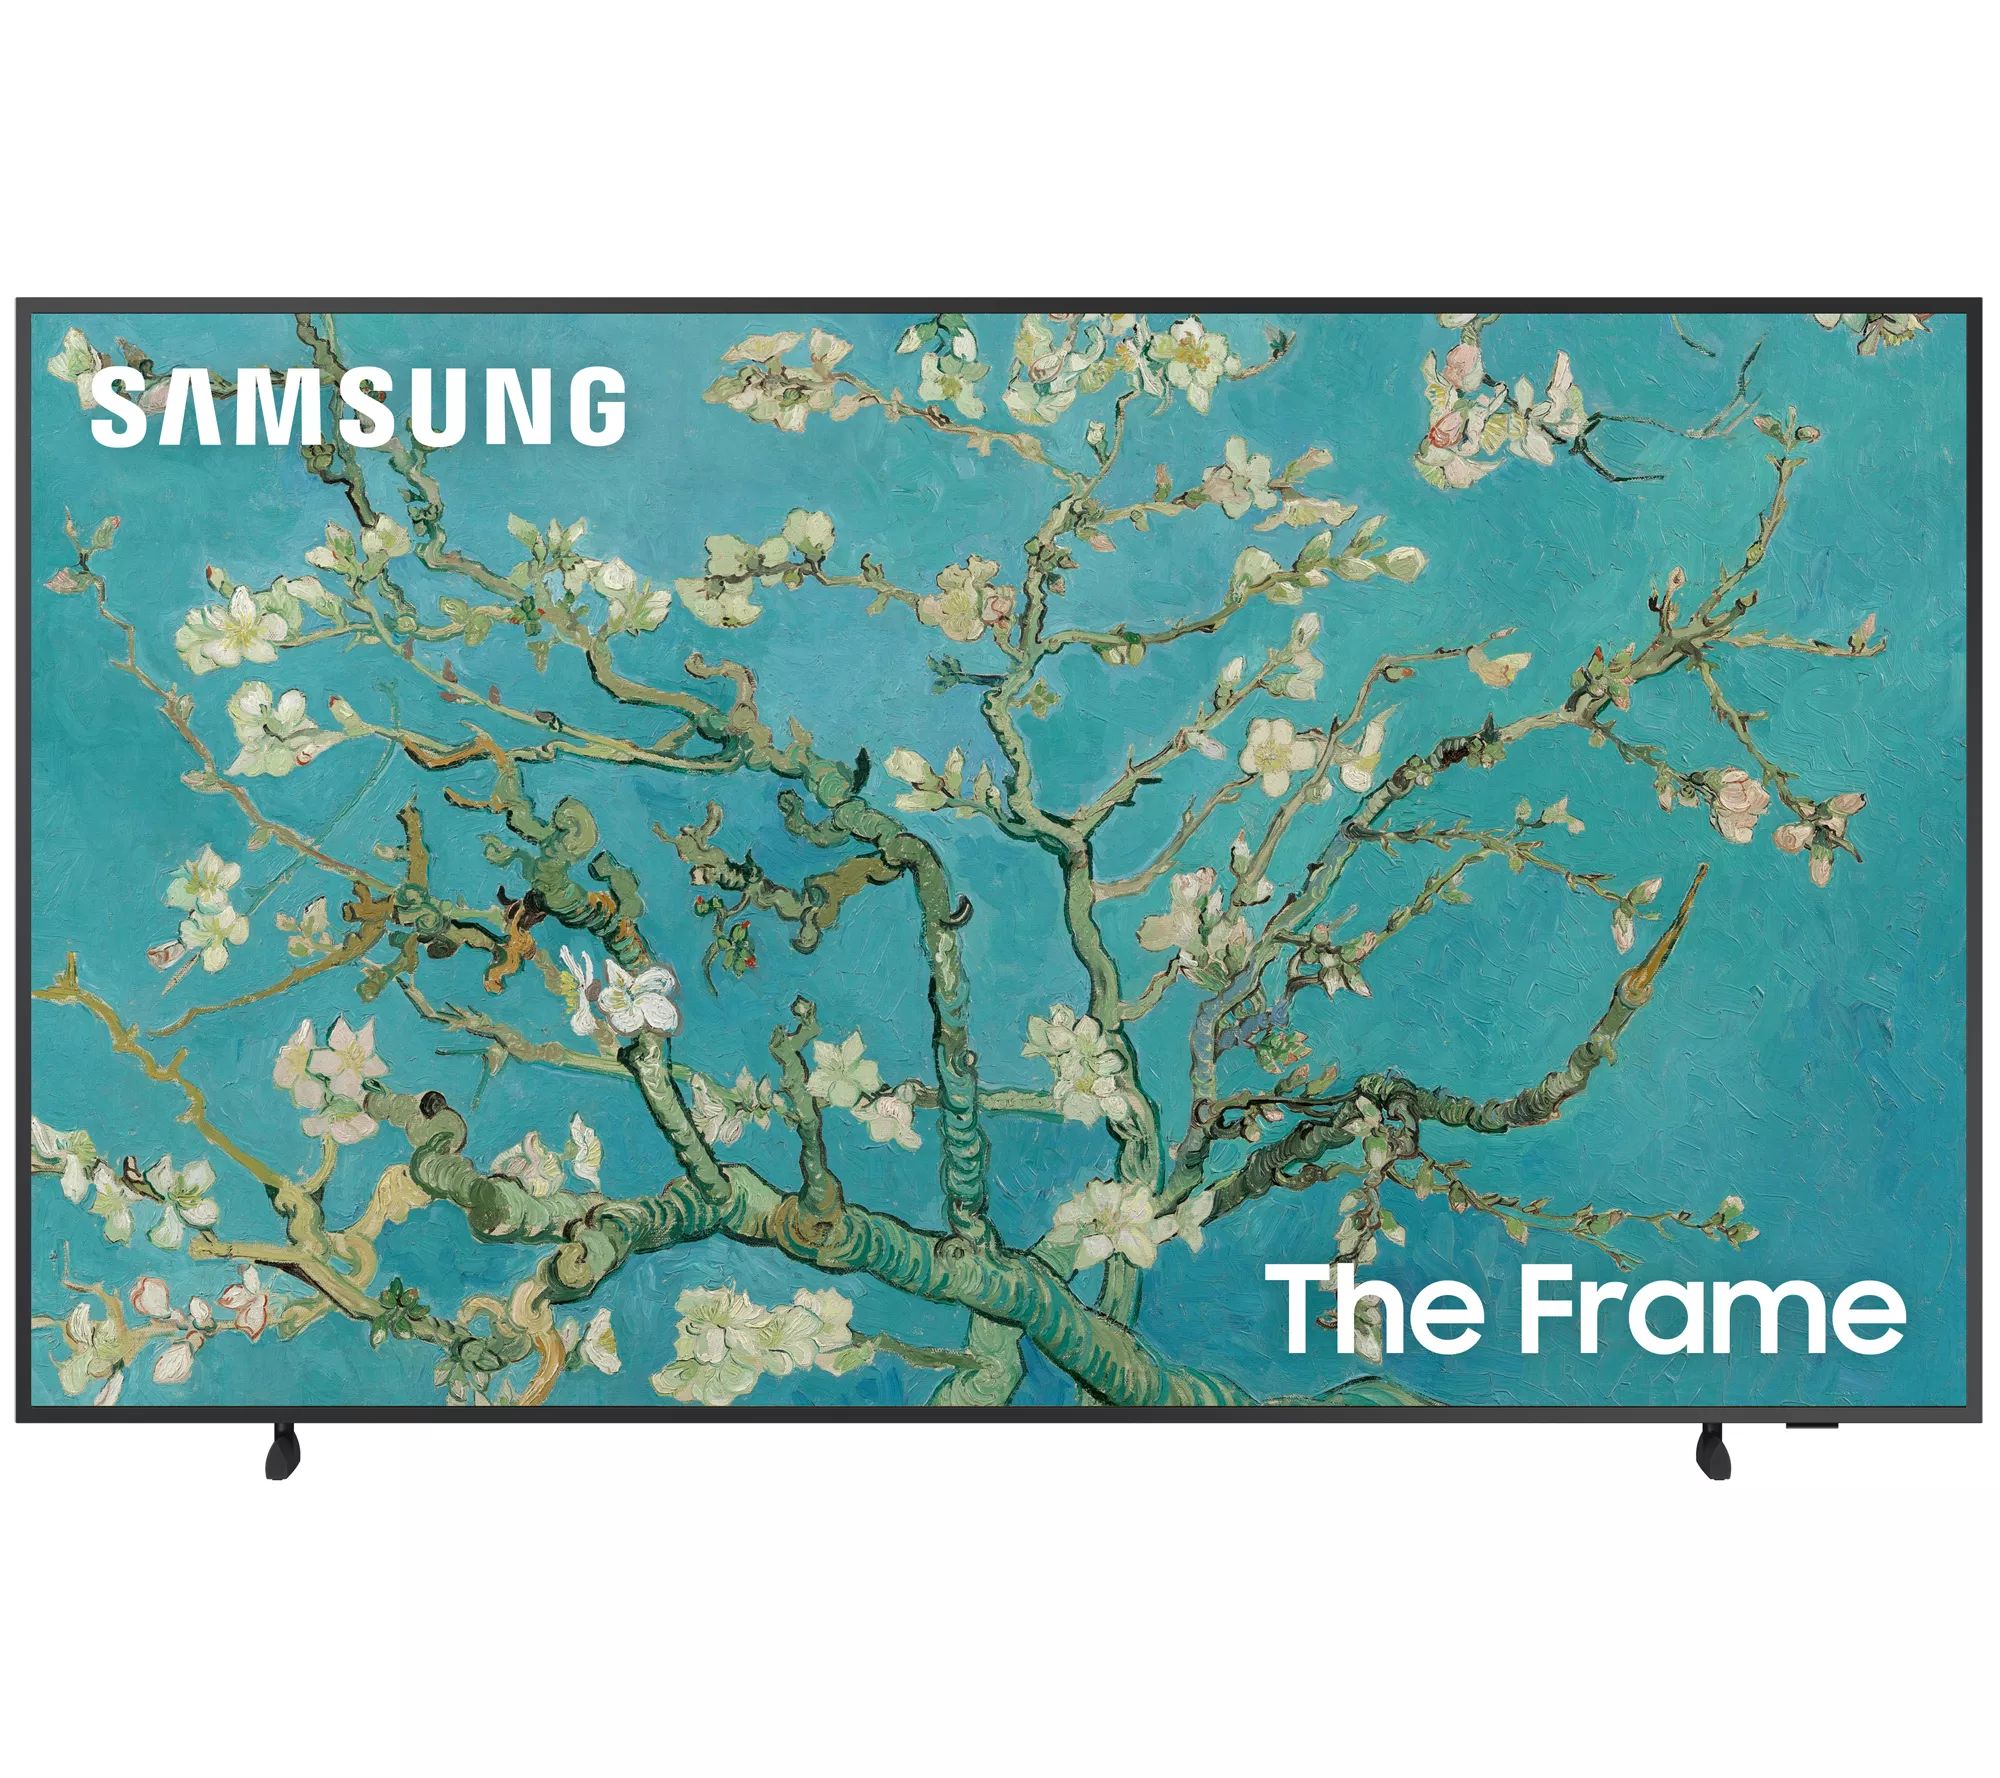 Samsung 43" The Frame 2022 QLED 4K Smart TV with 2-year Warranty | QVC